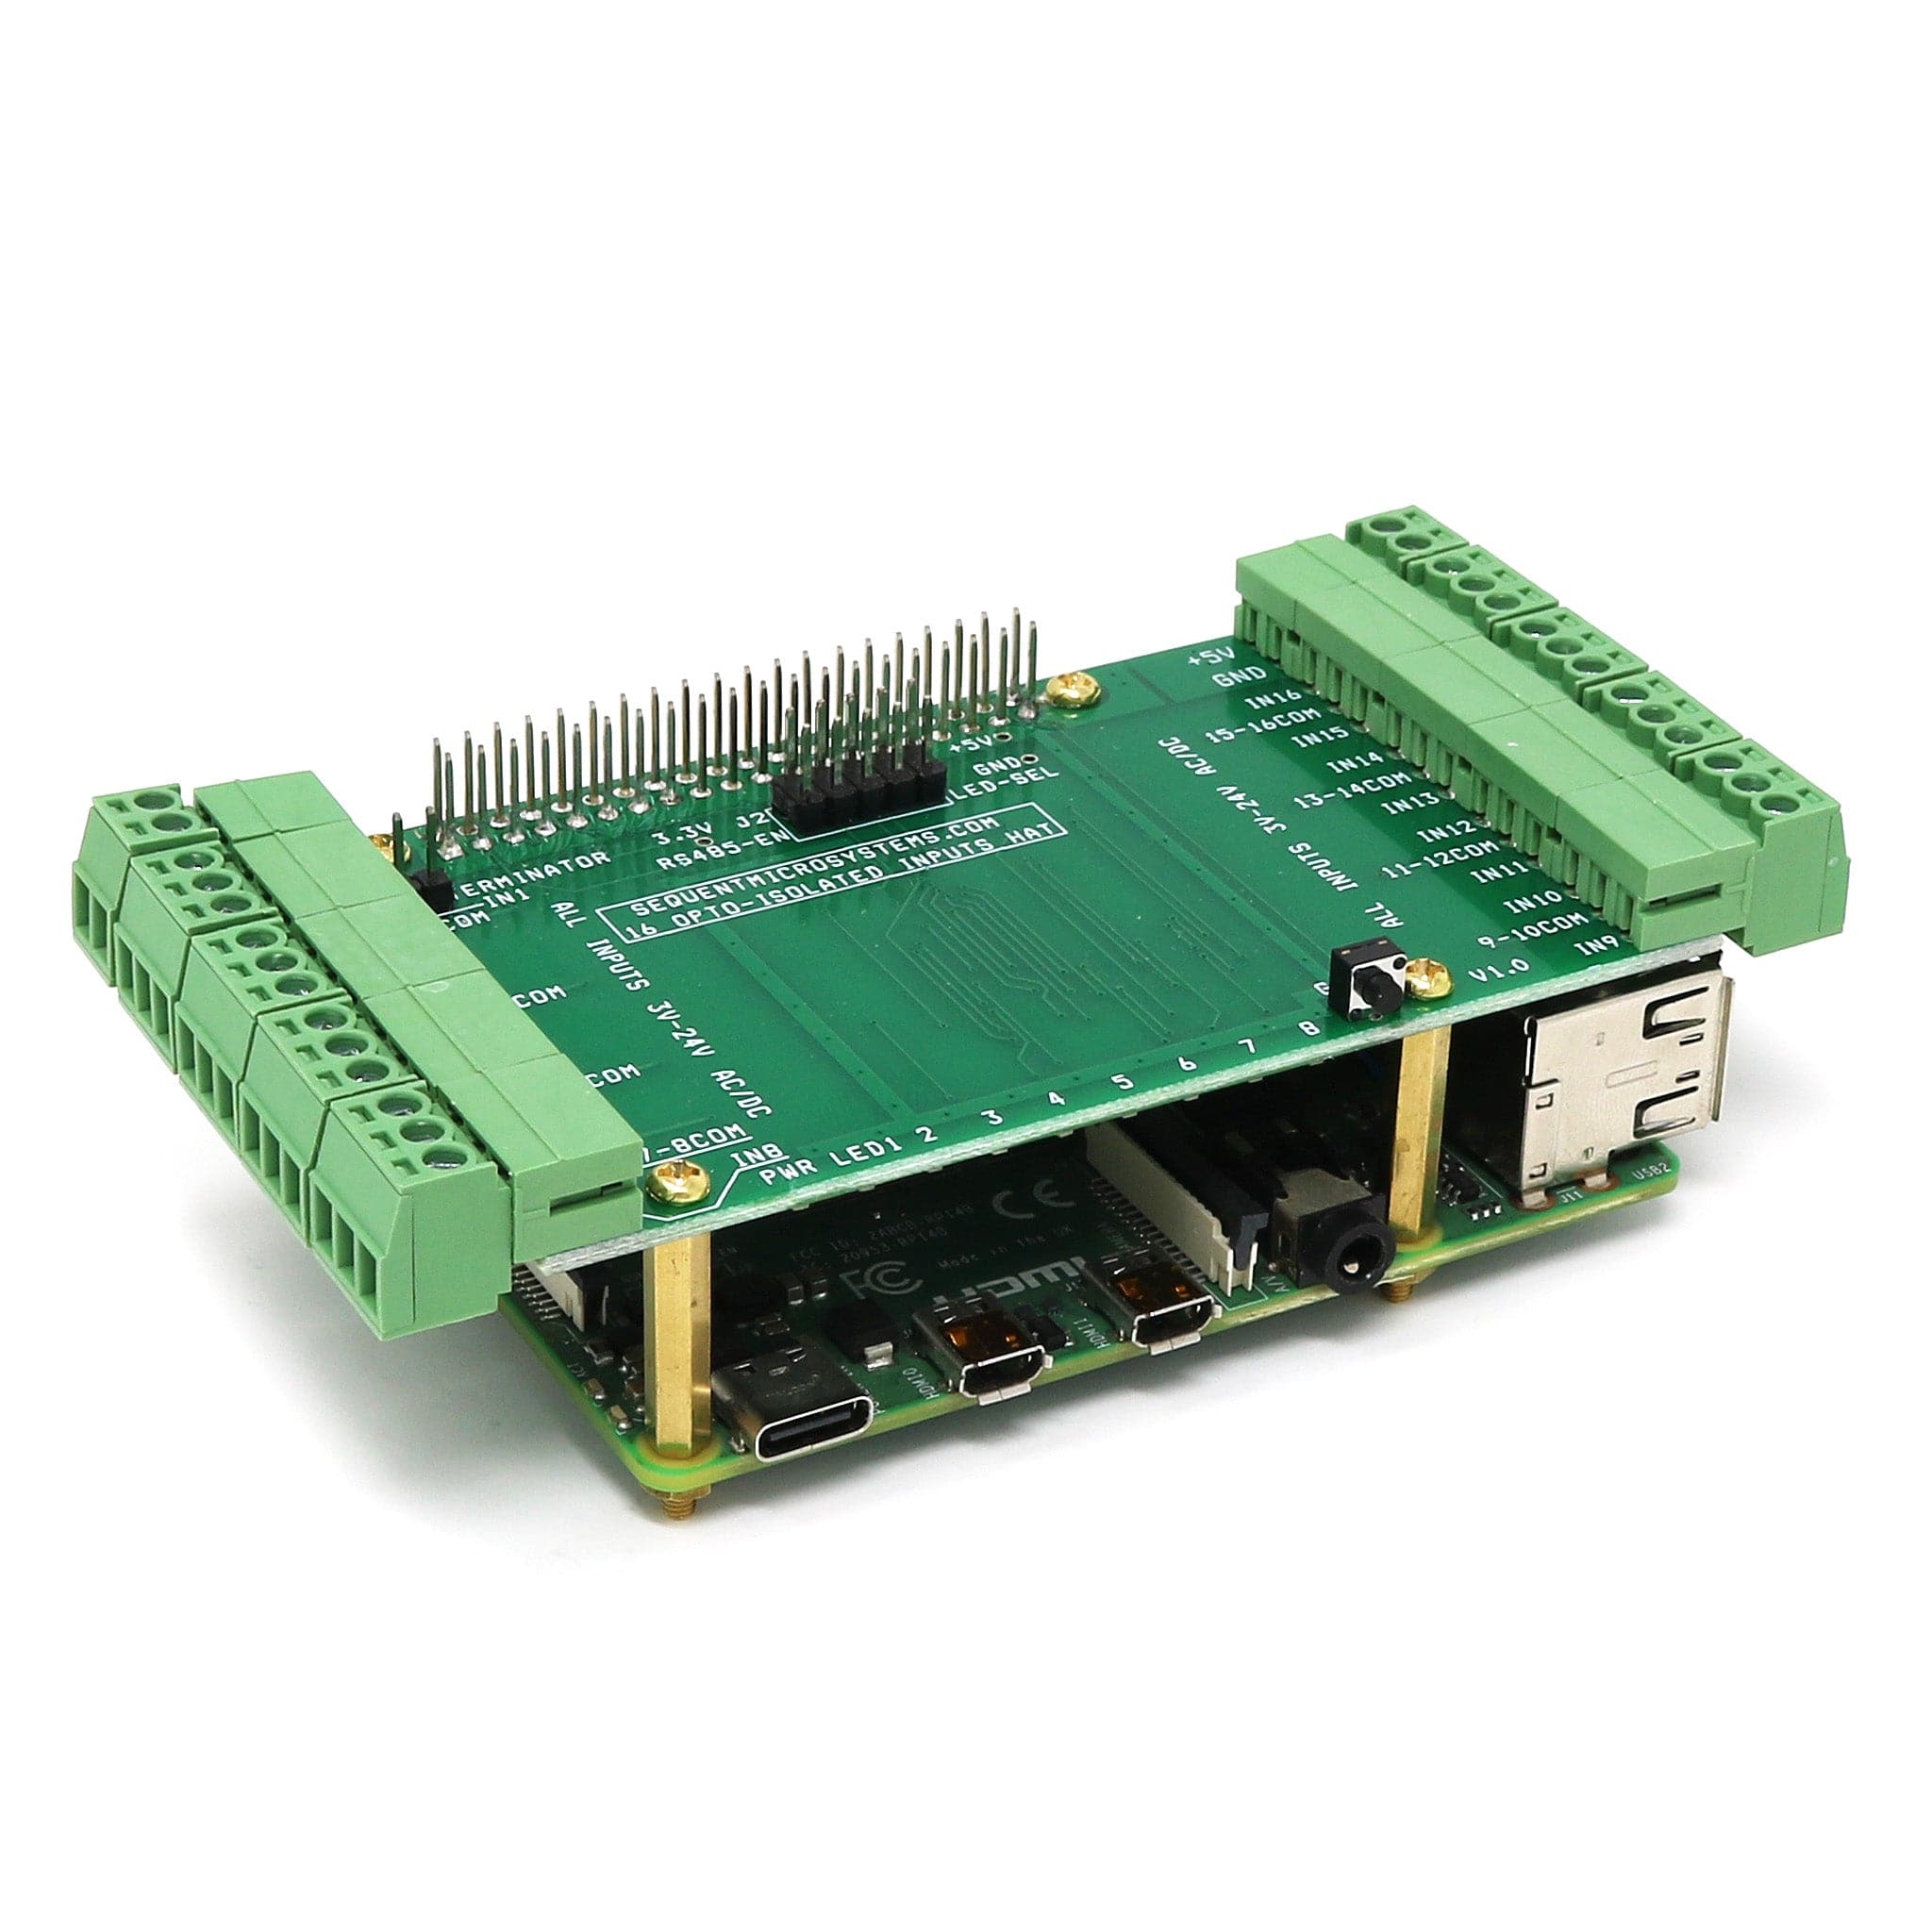 16 LV Digital Inputs 8-Layer Stackable HAT for Raspberry Pi | The